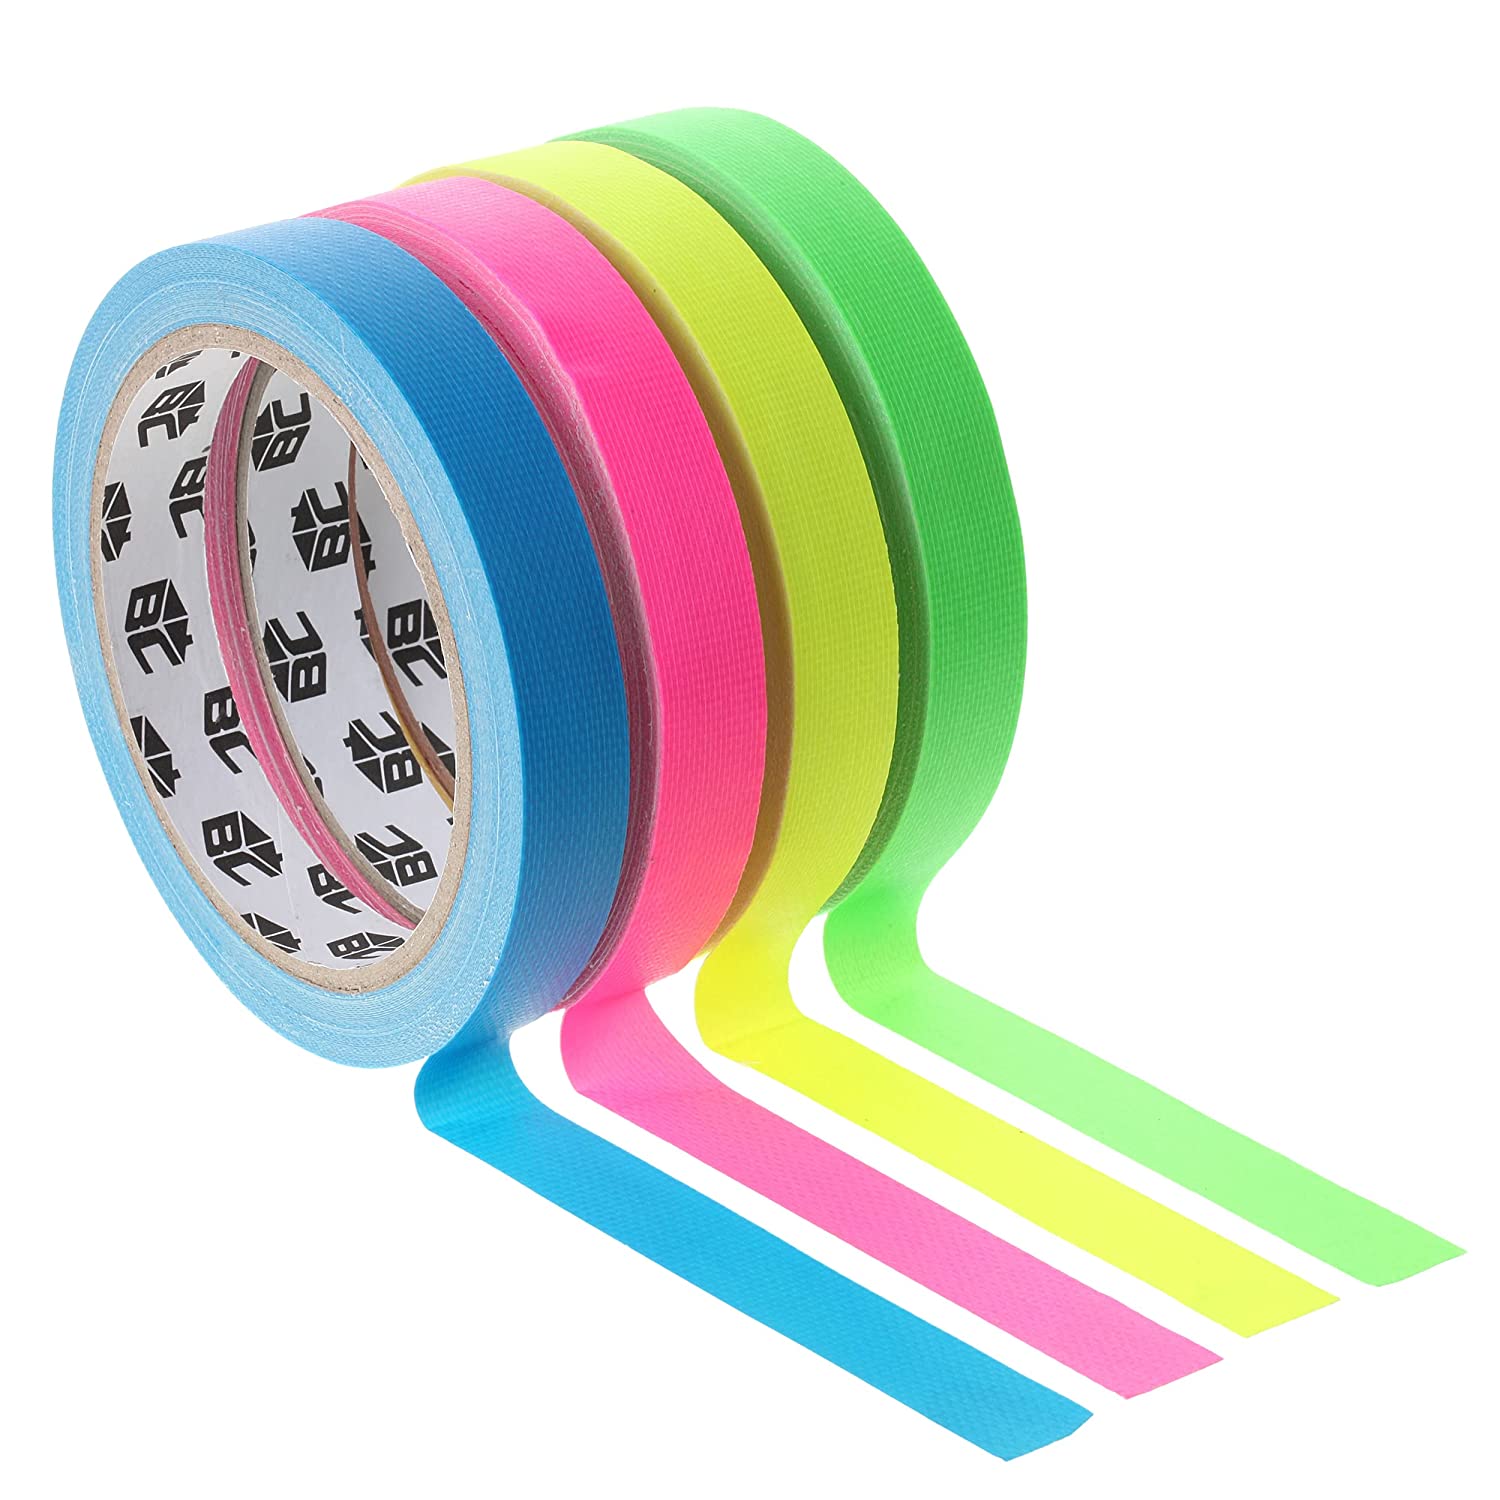 Bates- Colored Gaffers Tape, 4 Pack, Neon Colors, 0.65 Inch x 11 Yards,  Gaffers Tape, Gaff Tape, Spike Tape - Bates Choice